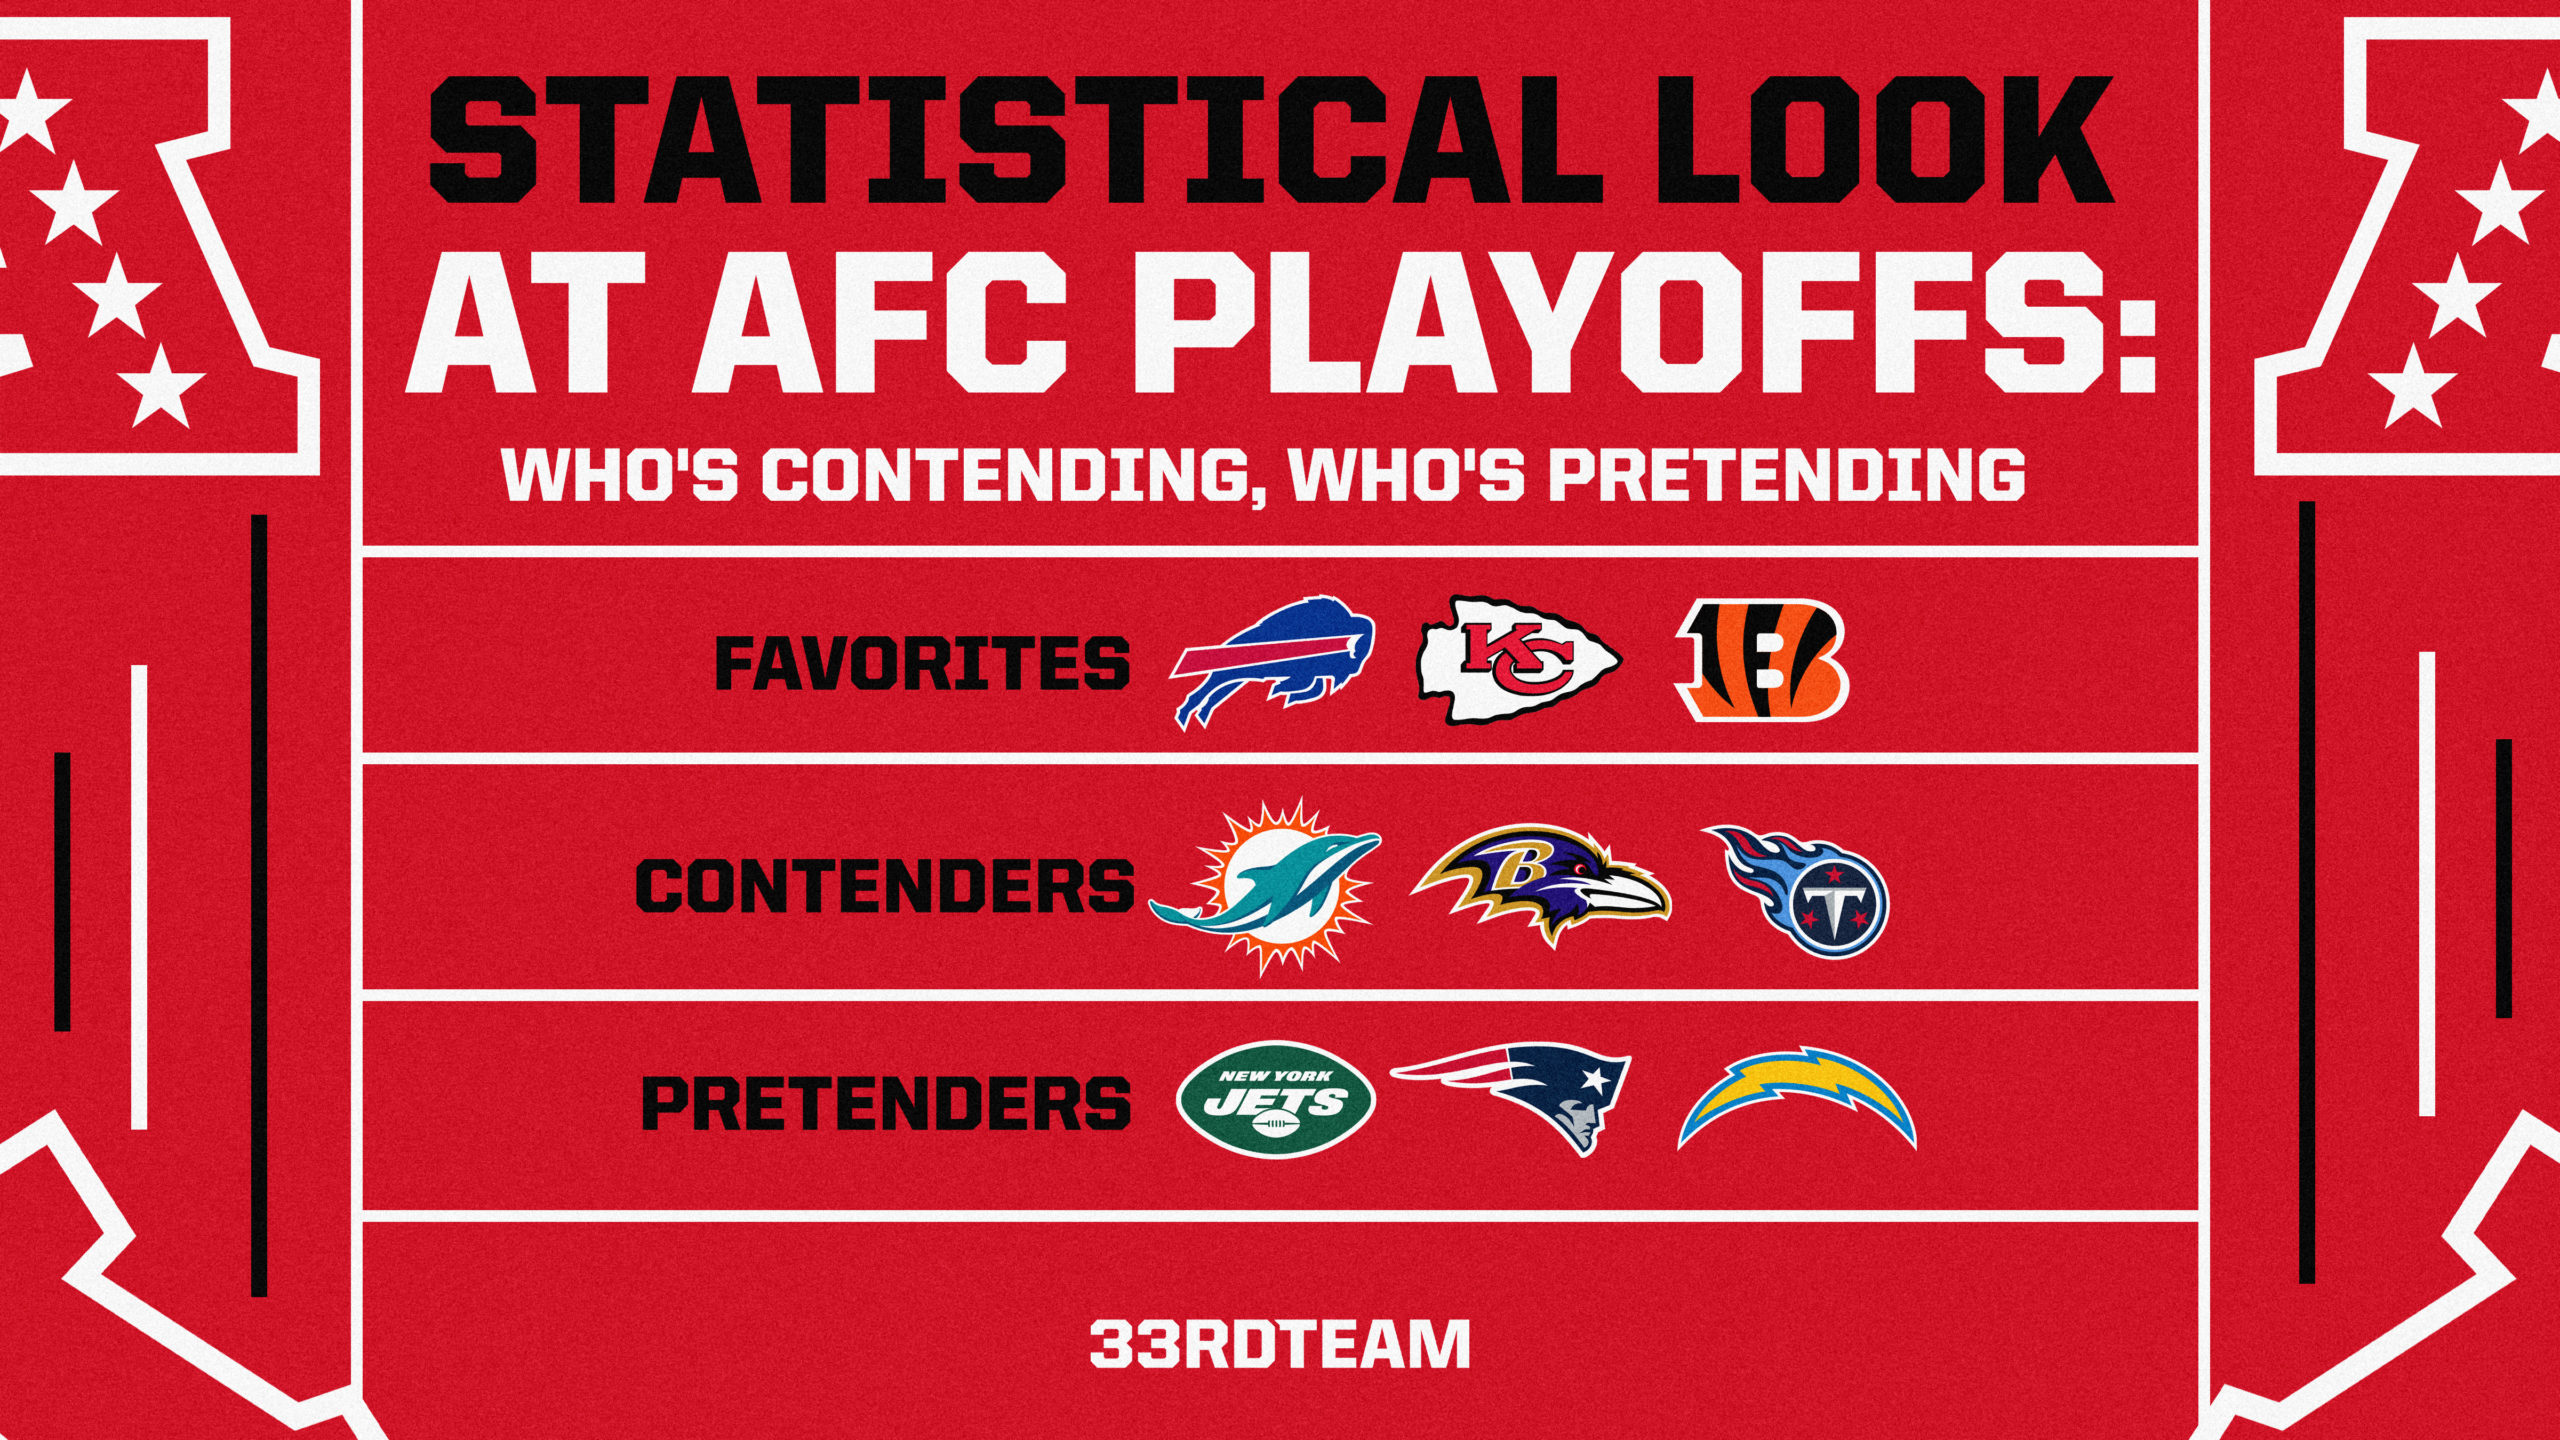 2022 AFC Playoff Picture: Who's Contending, Who's Pretending?